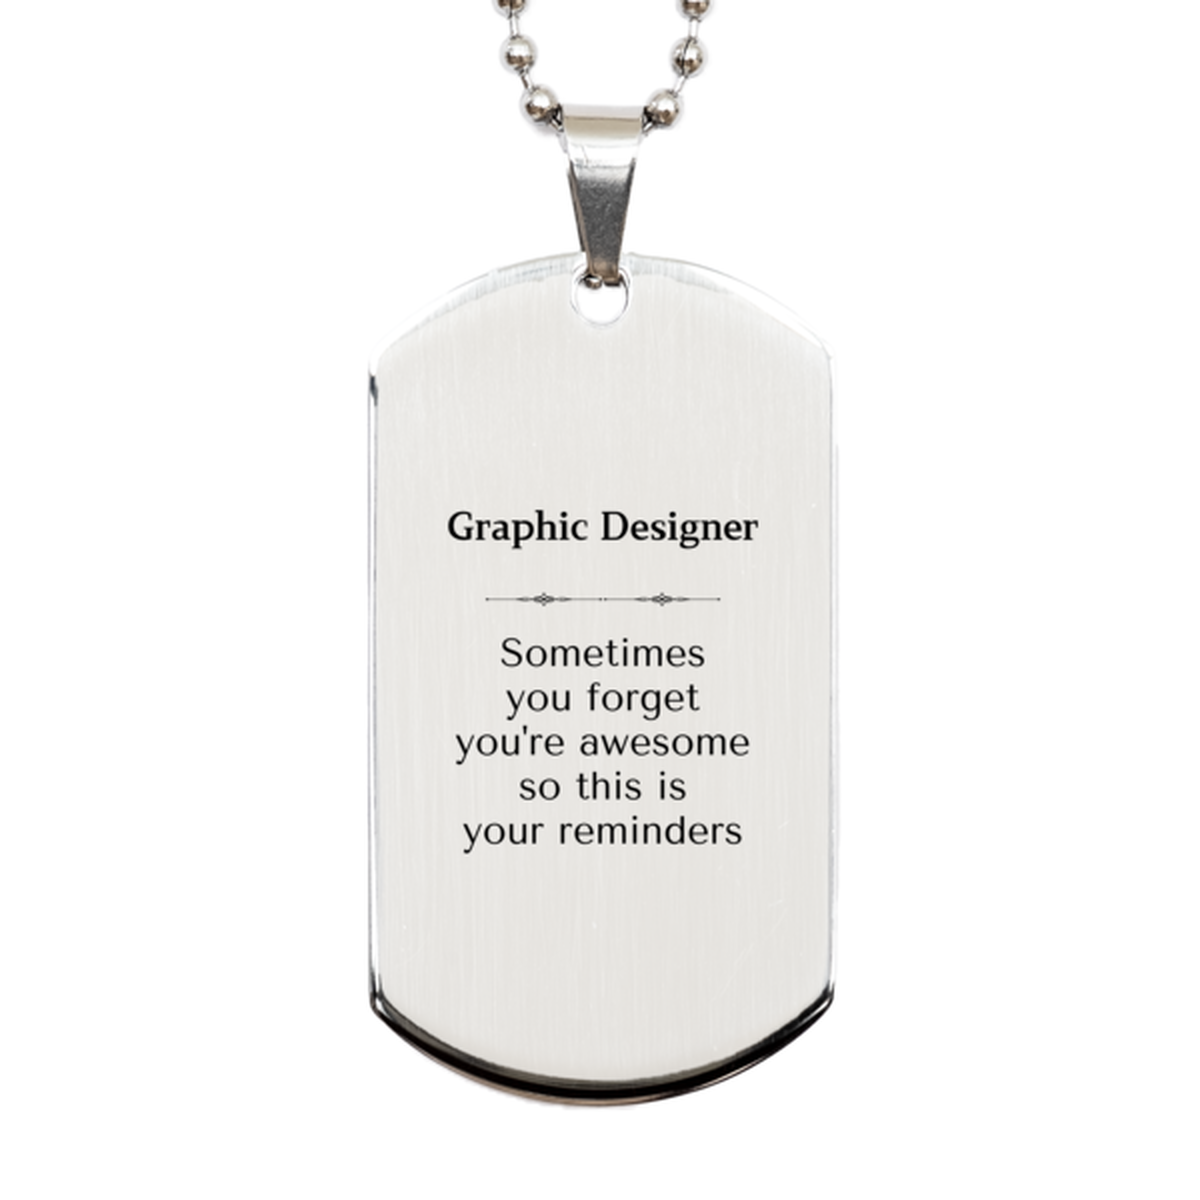 Sentimental Graphic Designer Silver Dog Tag, Graphic Designer Sometimes you forget you're awesome so this is your reminders, Graduation Christmas Birthday Gifts for Graphic Designer, Men, Women, Coworkers